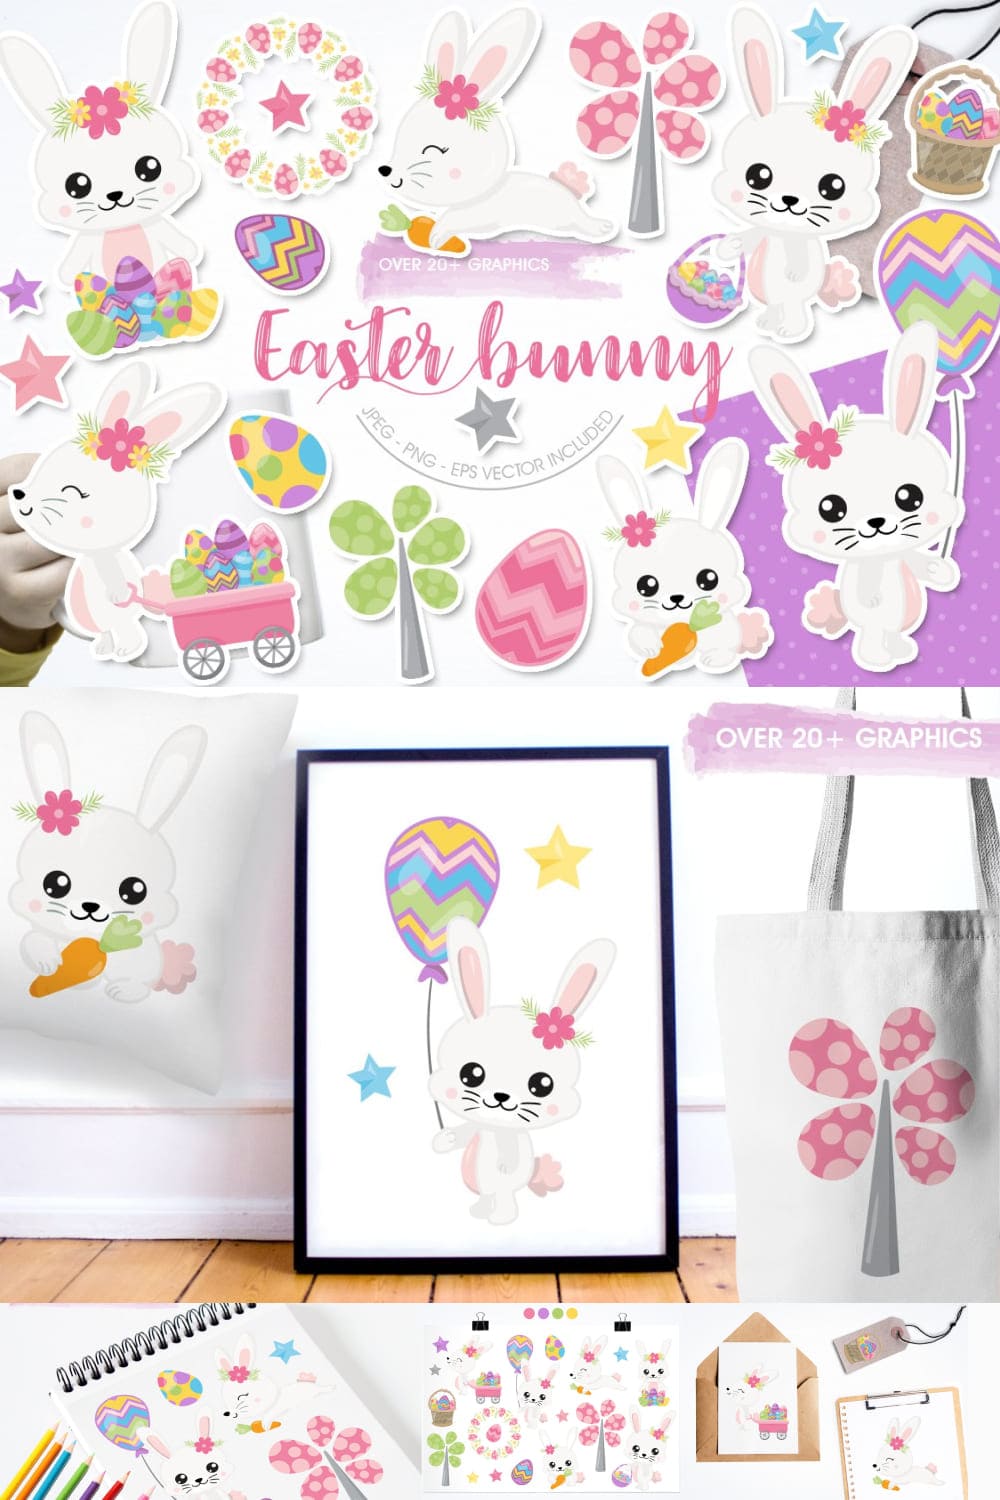 Easter Bunny - pinterest image preview.